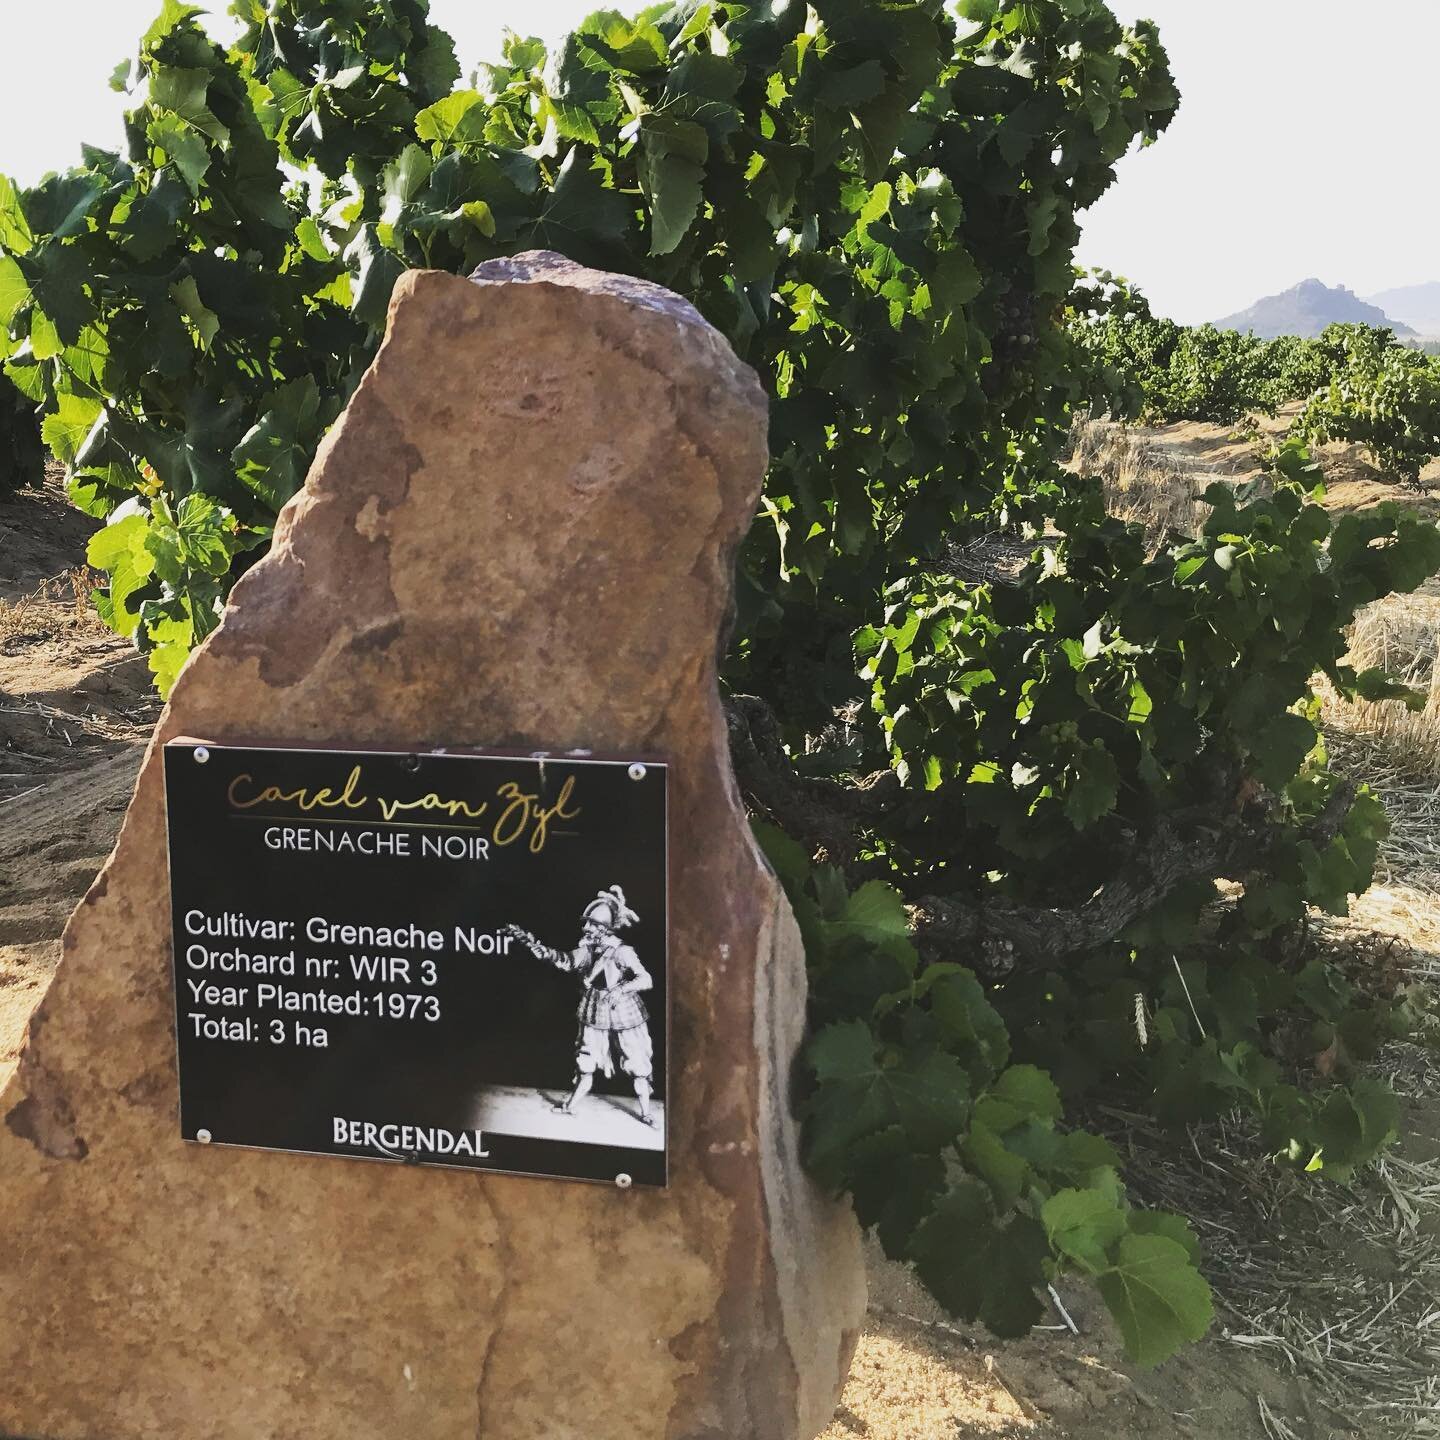 It may be a struggle for some of us to wrap our tongue around Piekenierskloof, but there is a very good reason why we represent these wines in the US. Some of the best Grenache you will ever taste comes from this remote part of South Africa. Intrigue